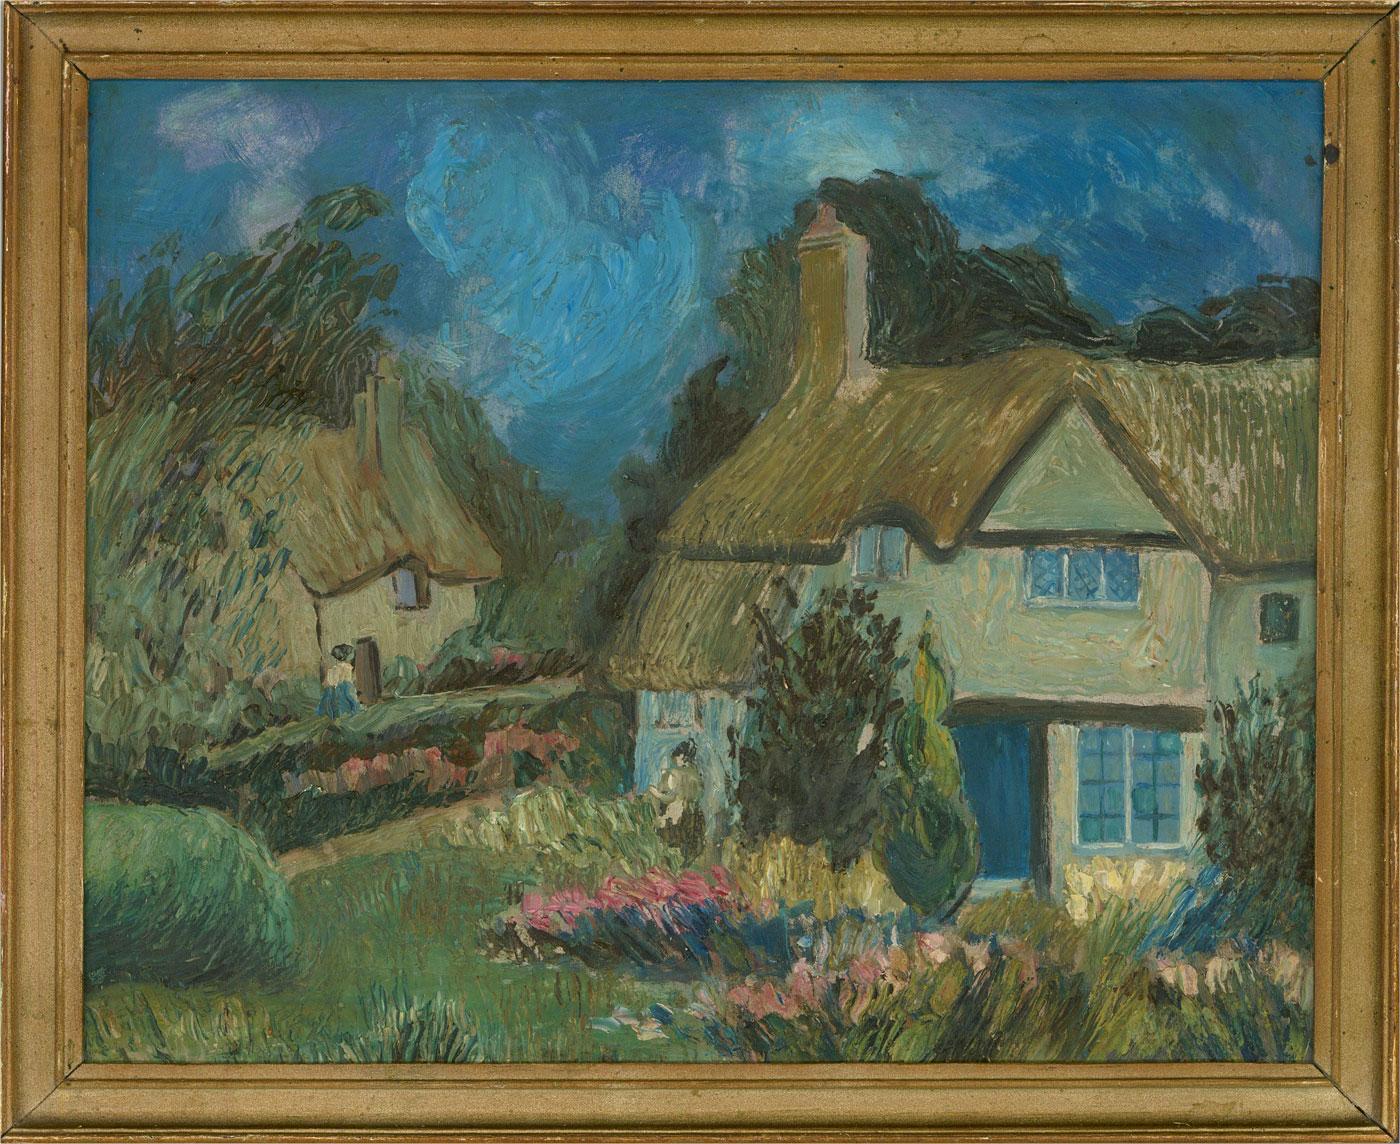 A captivating oil painting, depicting a rural landscape view with thatched cottages. Unsigned. Presented in a gilt-effect frame. On board.

